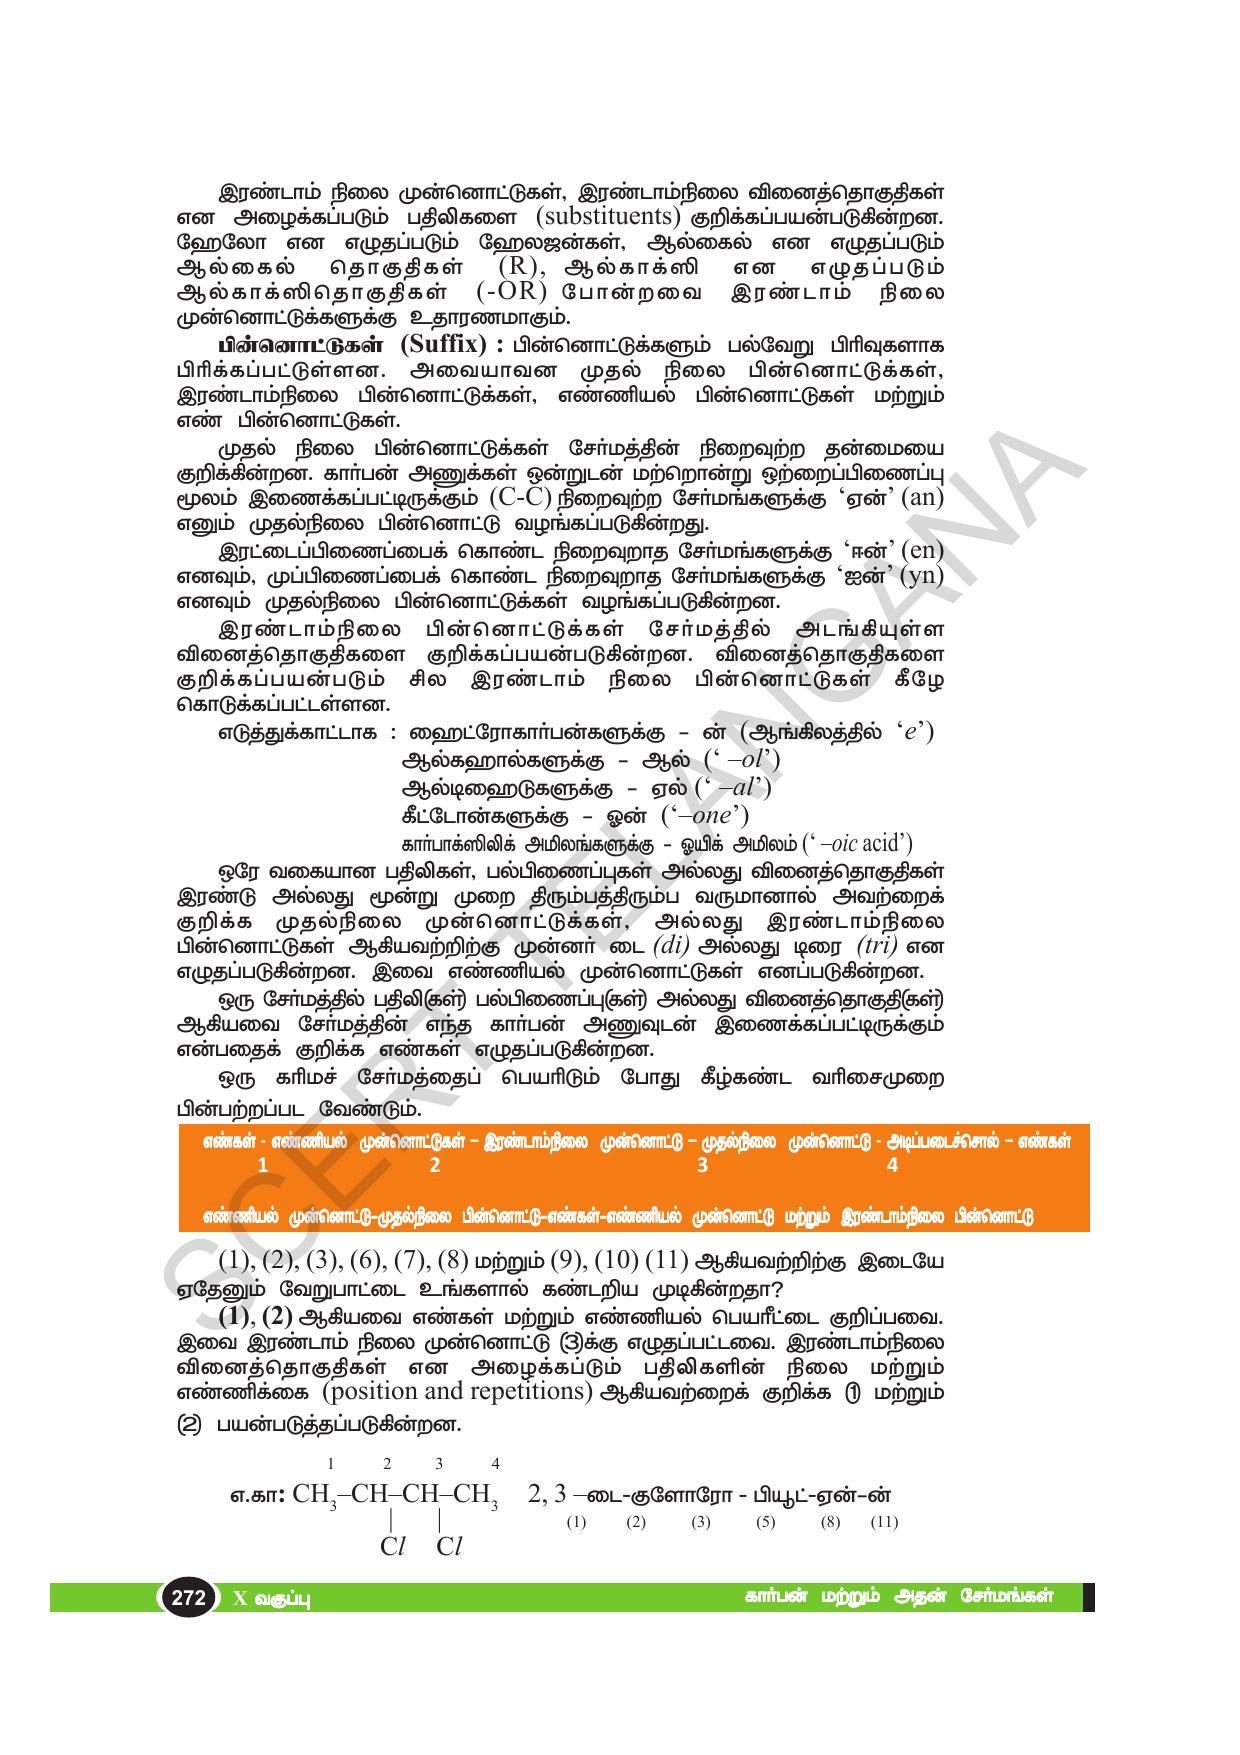 TS SCERT Class 10 Physical Science(Tamil Medium) Text Book - Page 284